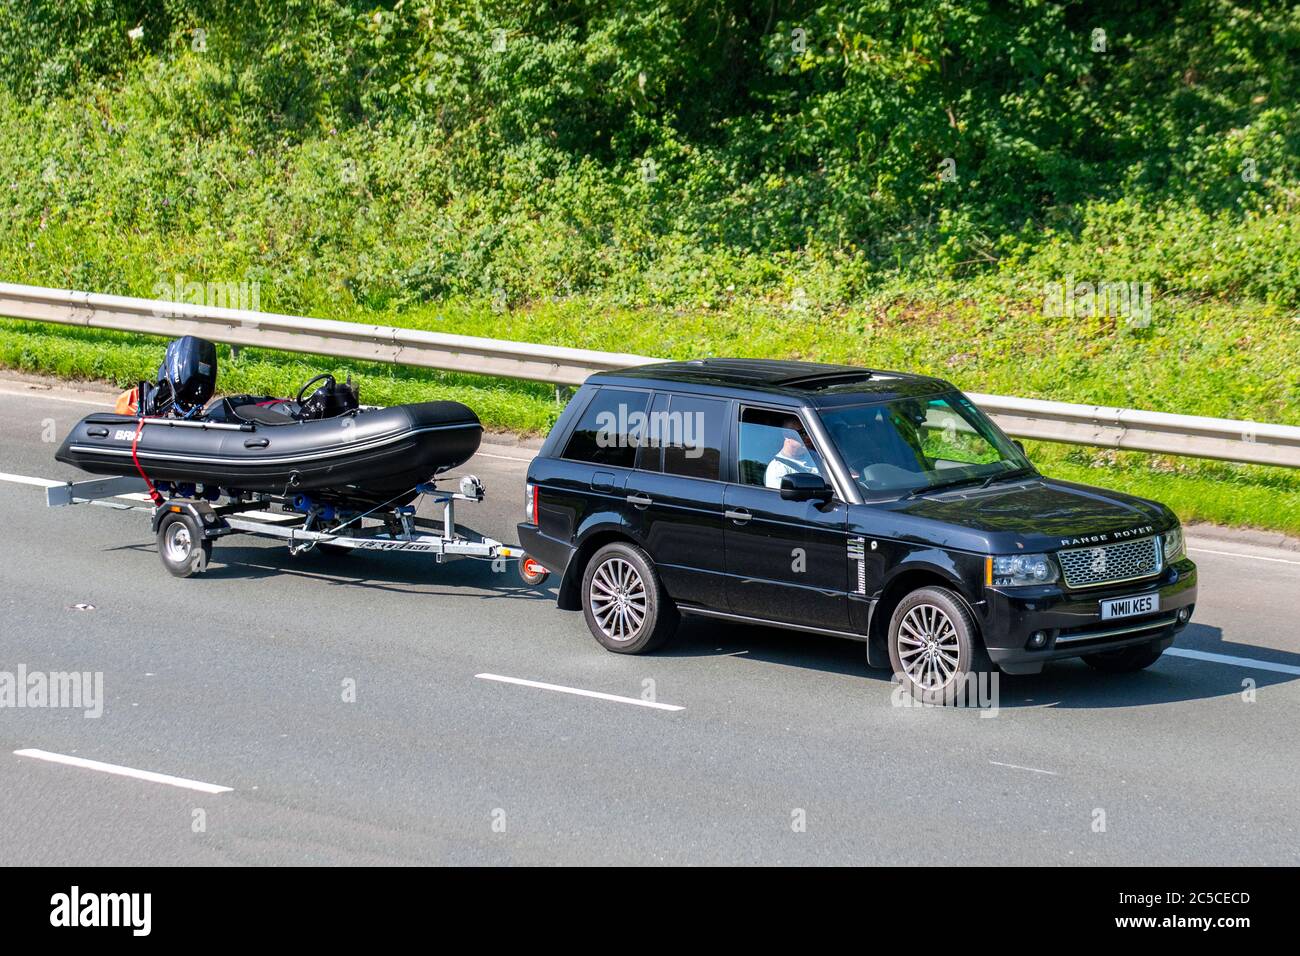 2011 black Land Rover Range Rover Vogue se ; Vehicular traffic moving vehicles, cars towing boat trailer, driving vehicle on UK roads, motors towed BRIG rigid inflatable boats, motoring on the M6 motorway highway network. Stock Photo